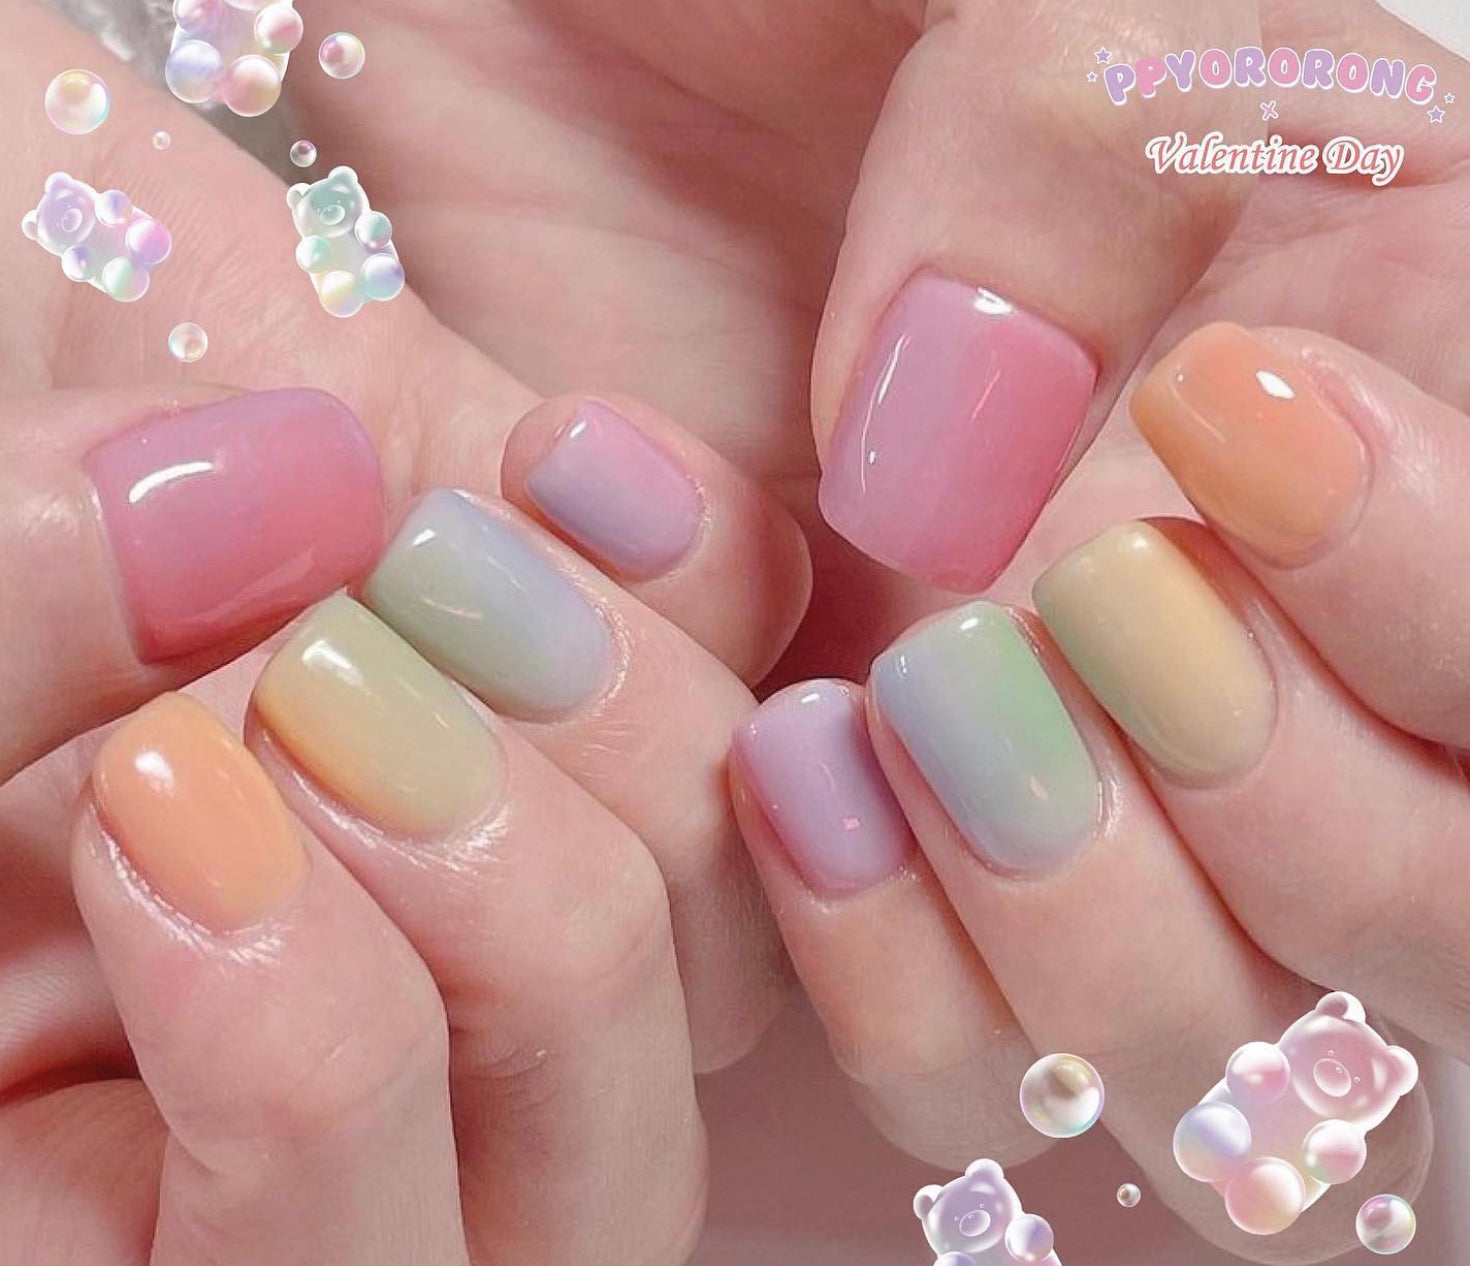 Nail Polish Trends, Nail Design & Art Ideas and Manicure Looks 2022